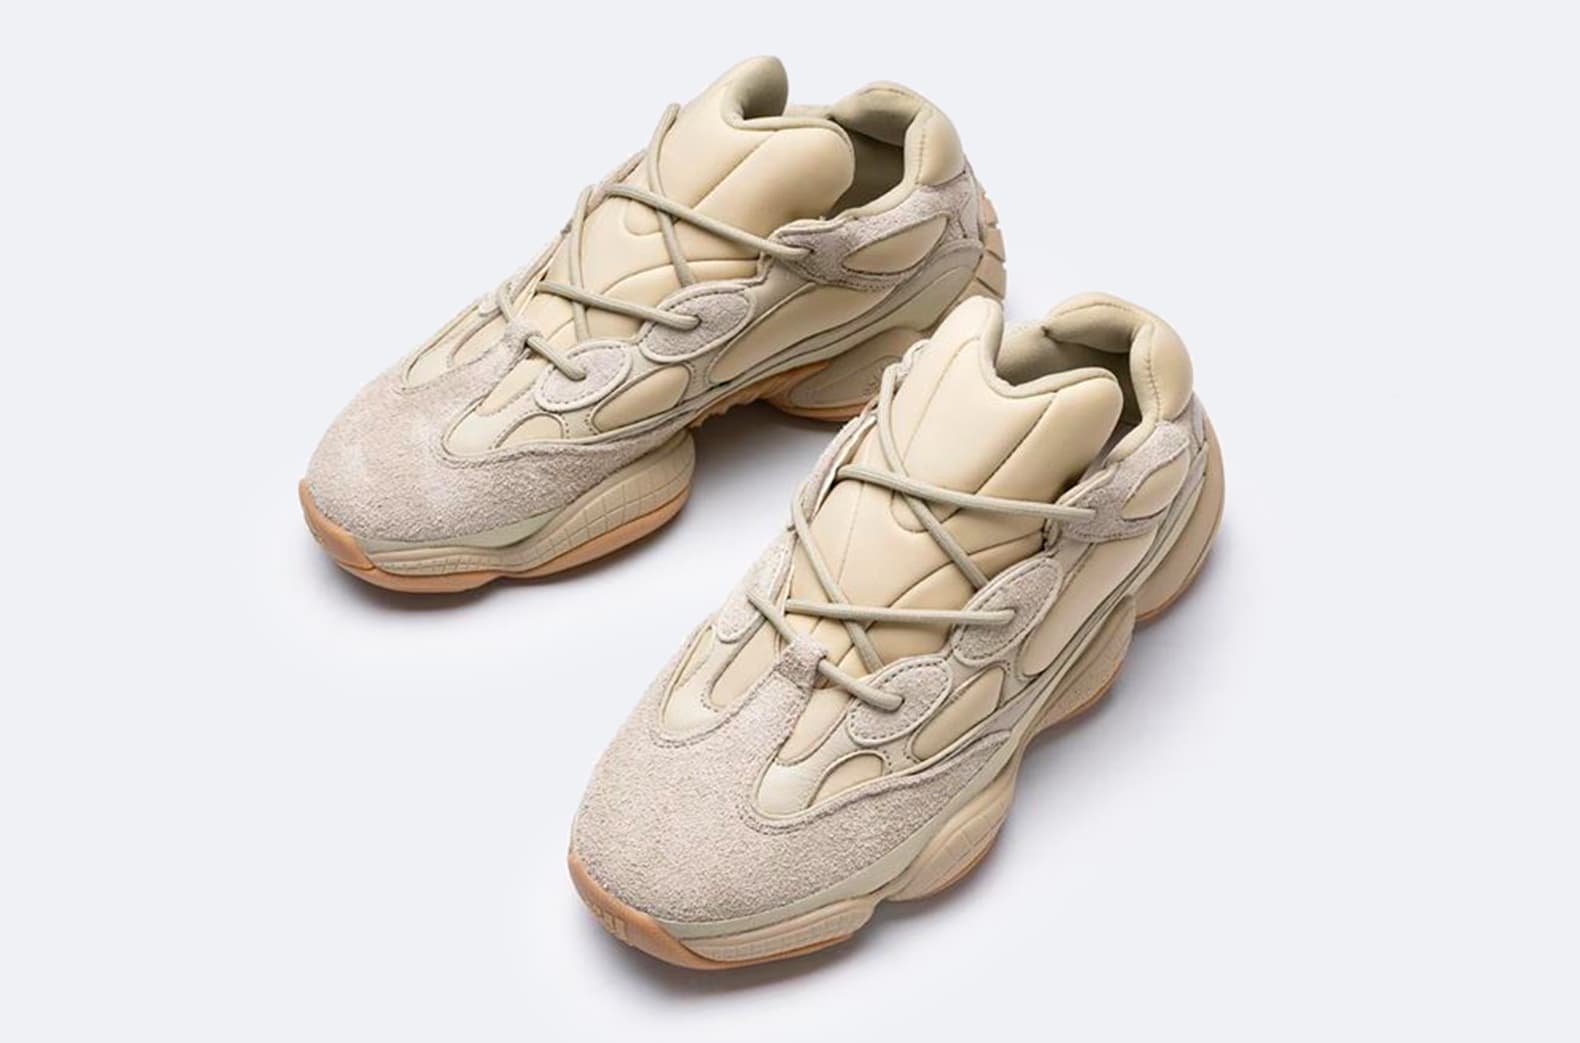 adidas-yeezy-500-stone-first-look-top